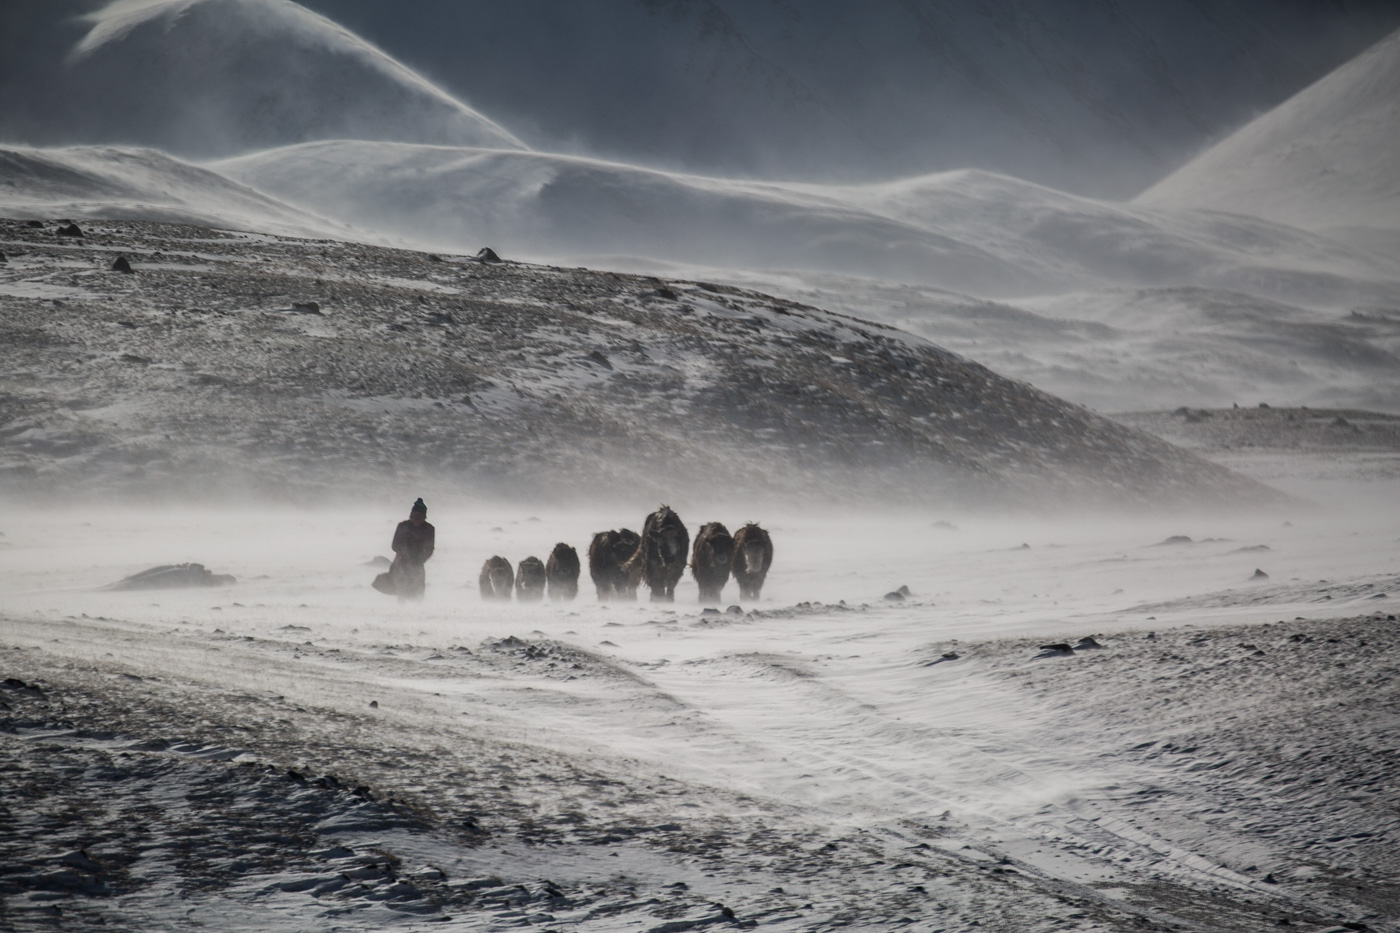 A Mongolian yak herder battling the winter weather conditions